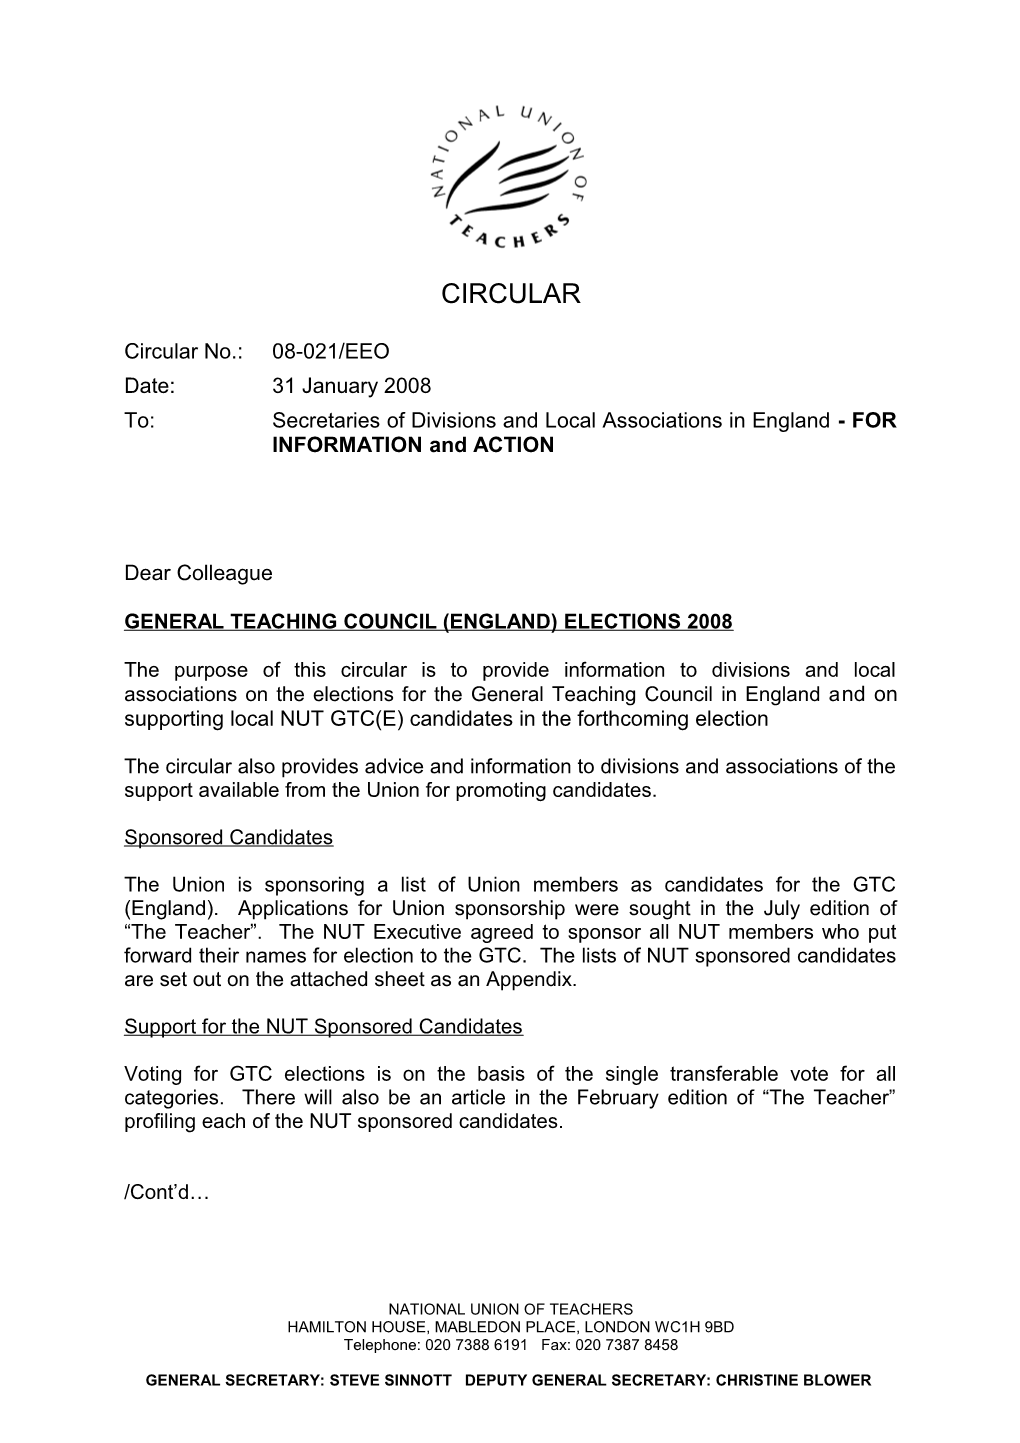 Doc Title: General Teaching Council -England- Elections 2008